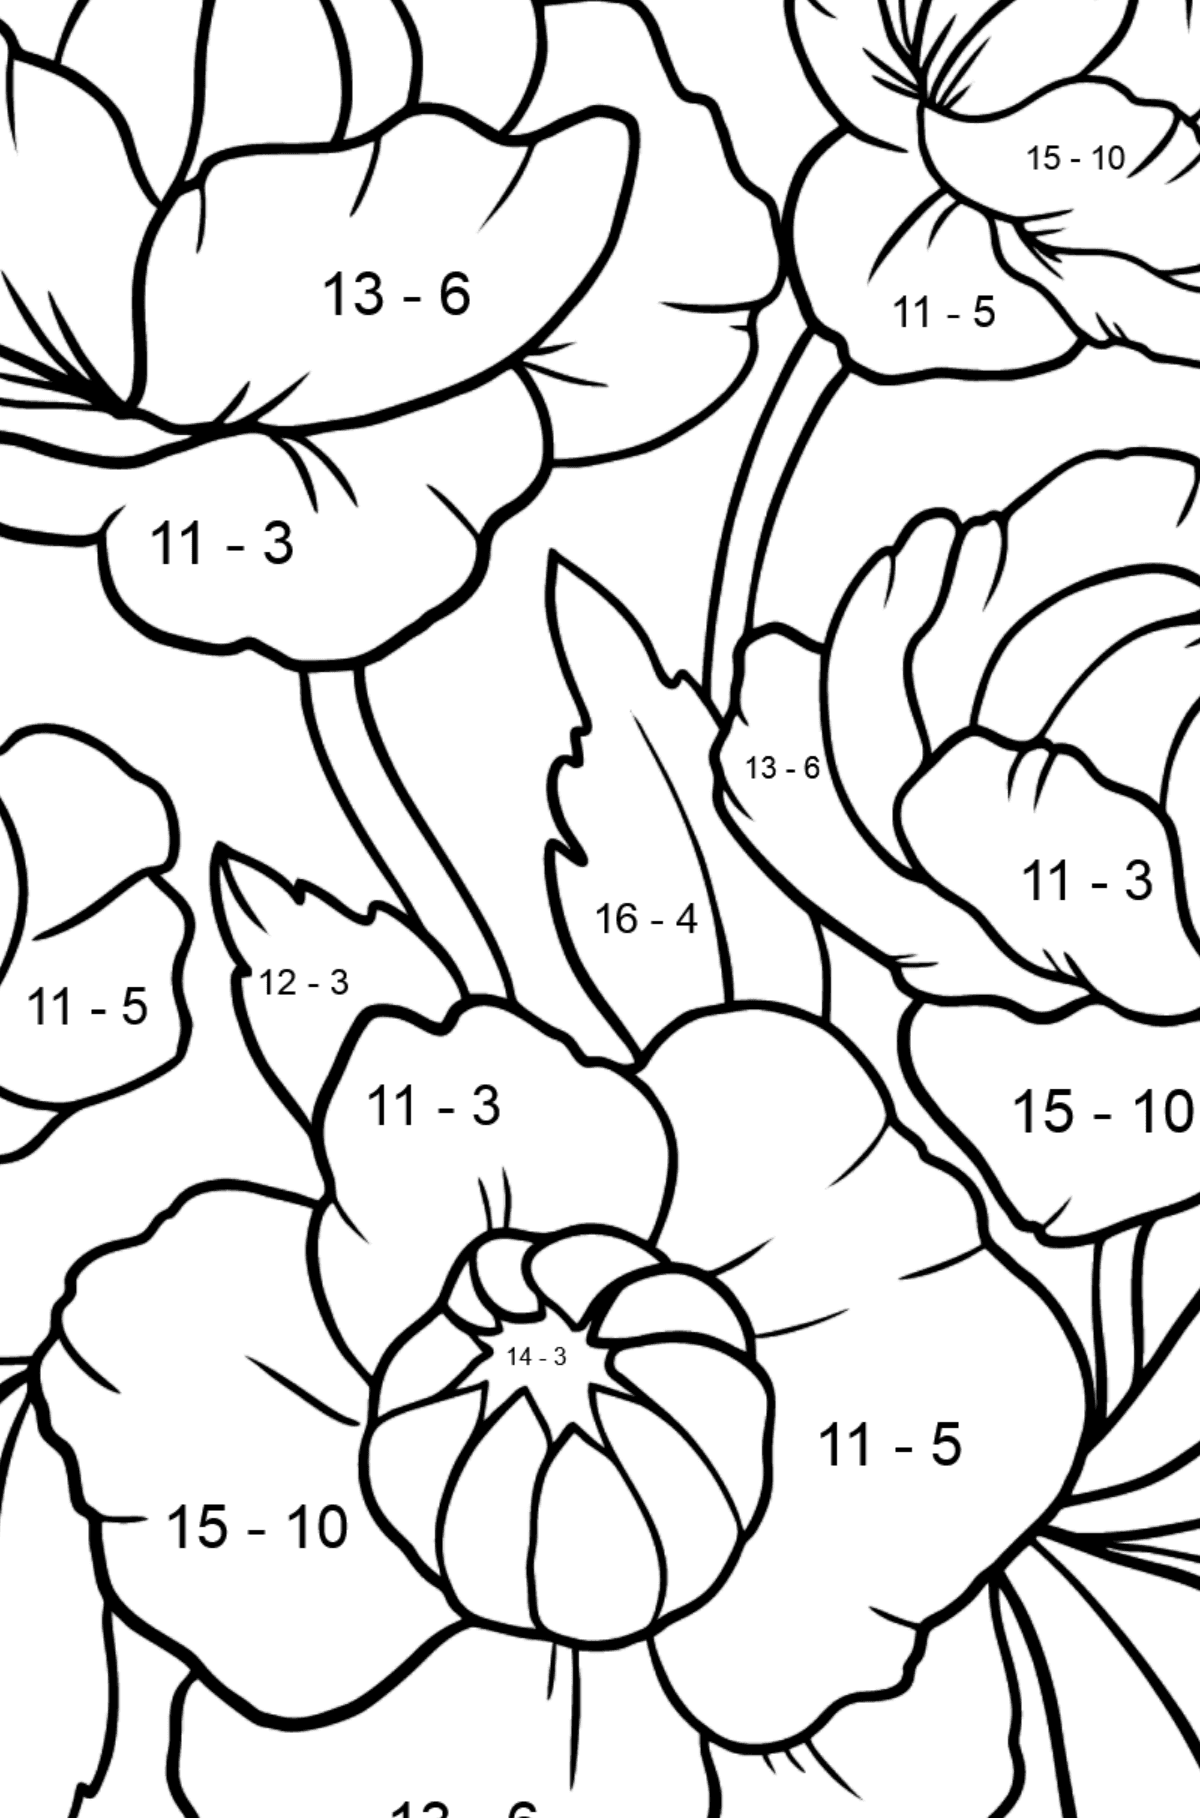 Flower Coloring Page - A Pink Globeflower - Math Coloring - Subtraction for Kids